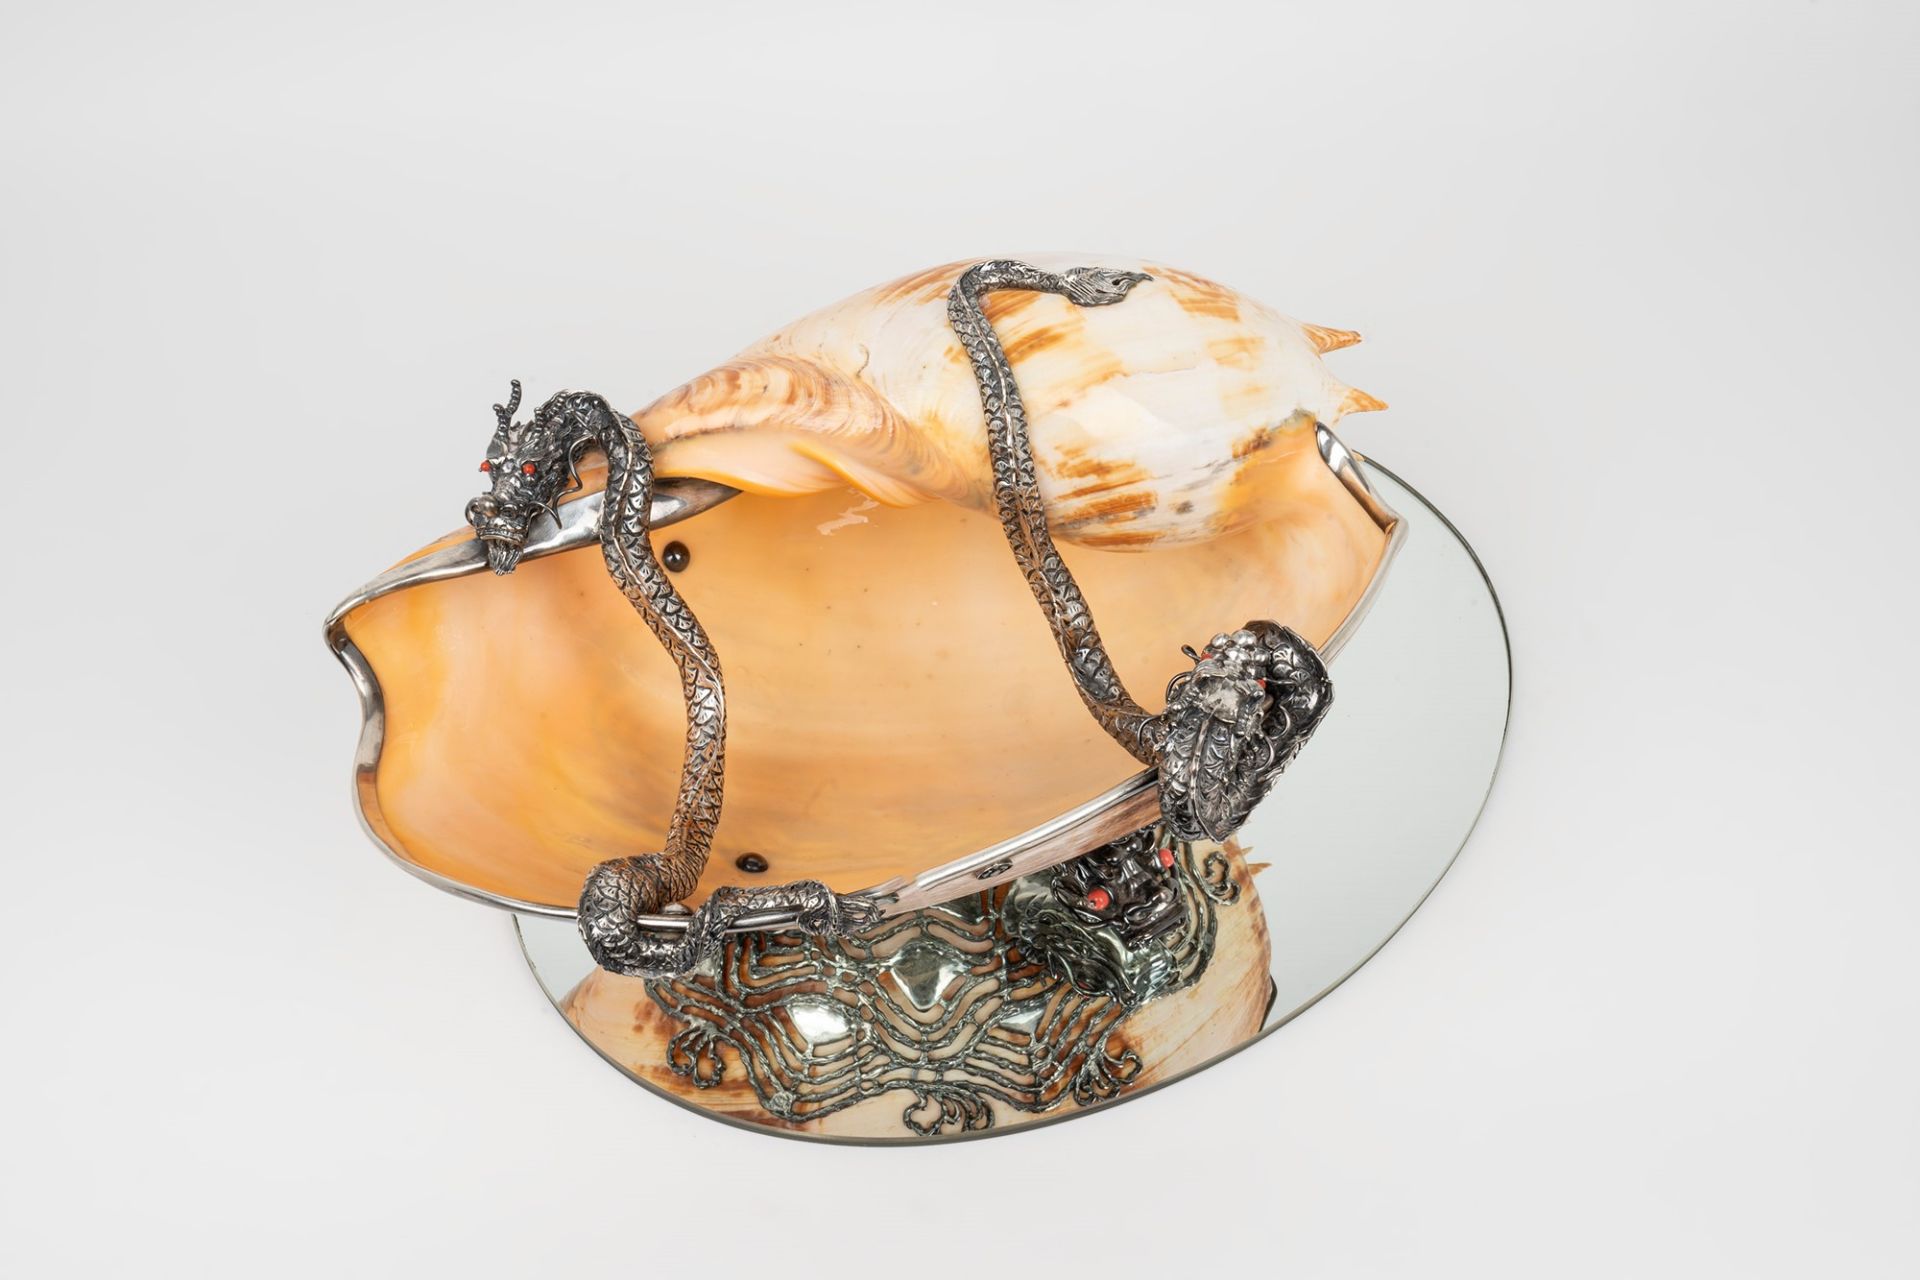 Large and important centerpiece in shell and 925 silver, 20th century - Image 4 of 7